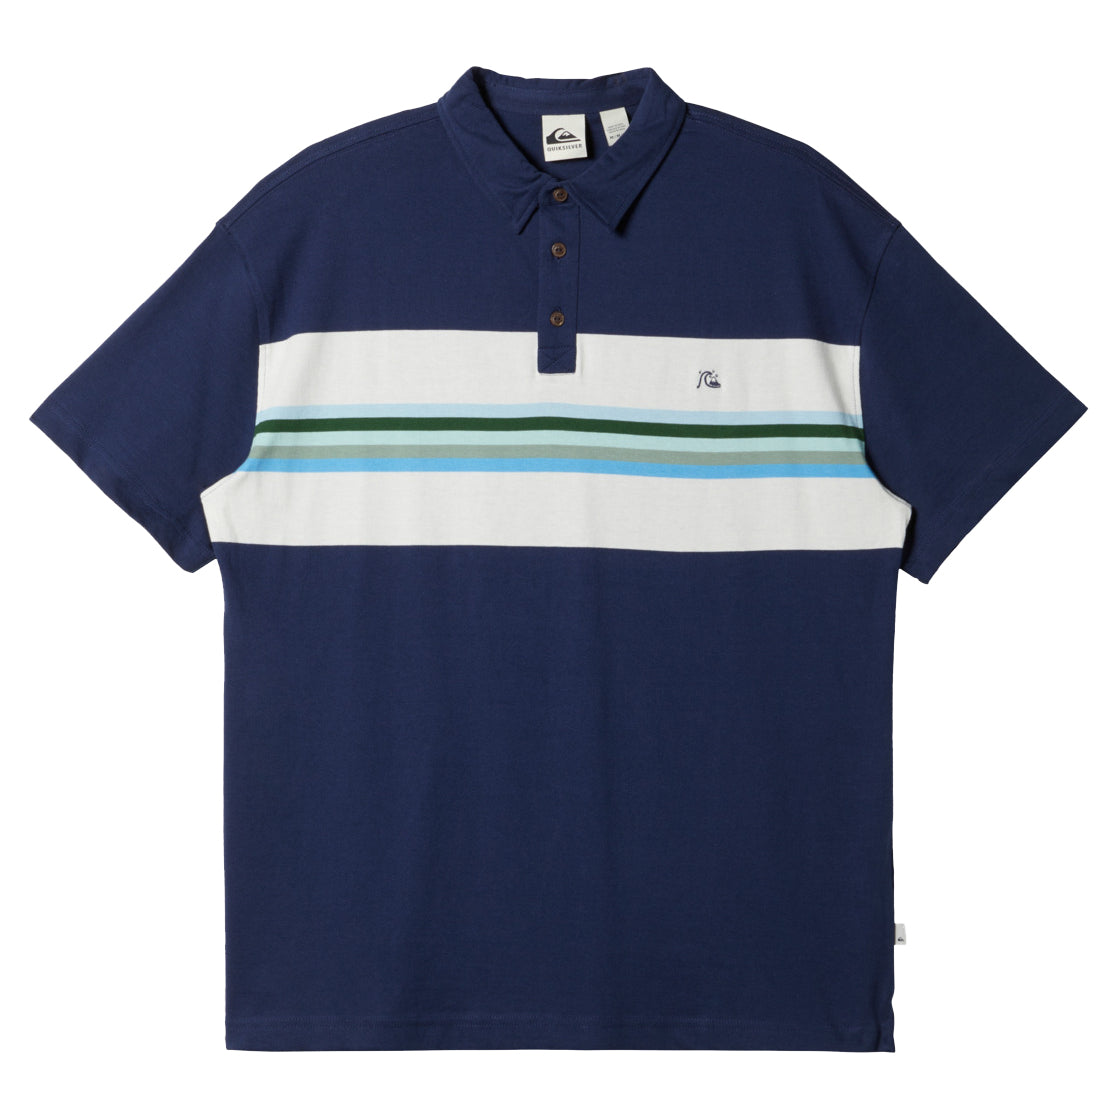 Quiksilver Alloy Days Polo Shirt BYM3 s